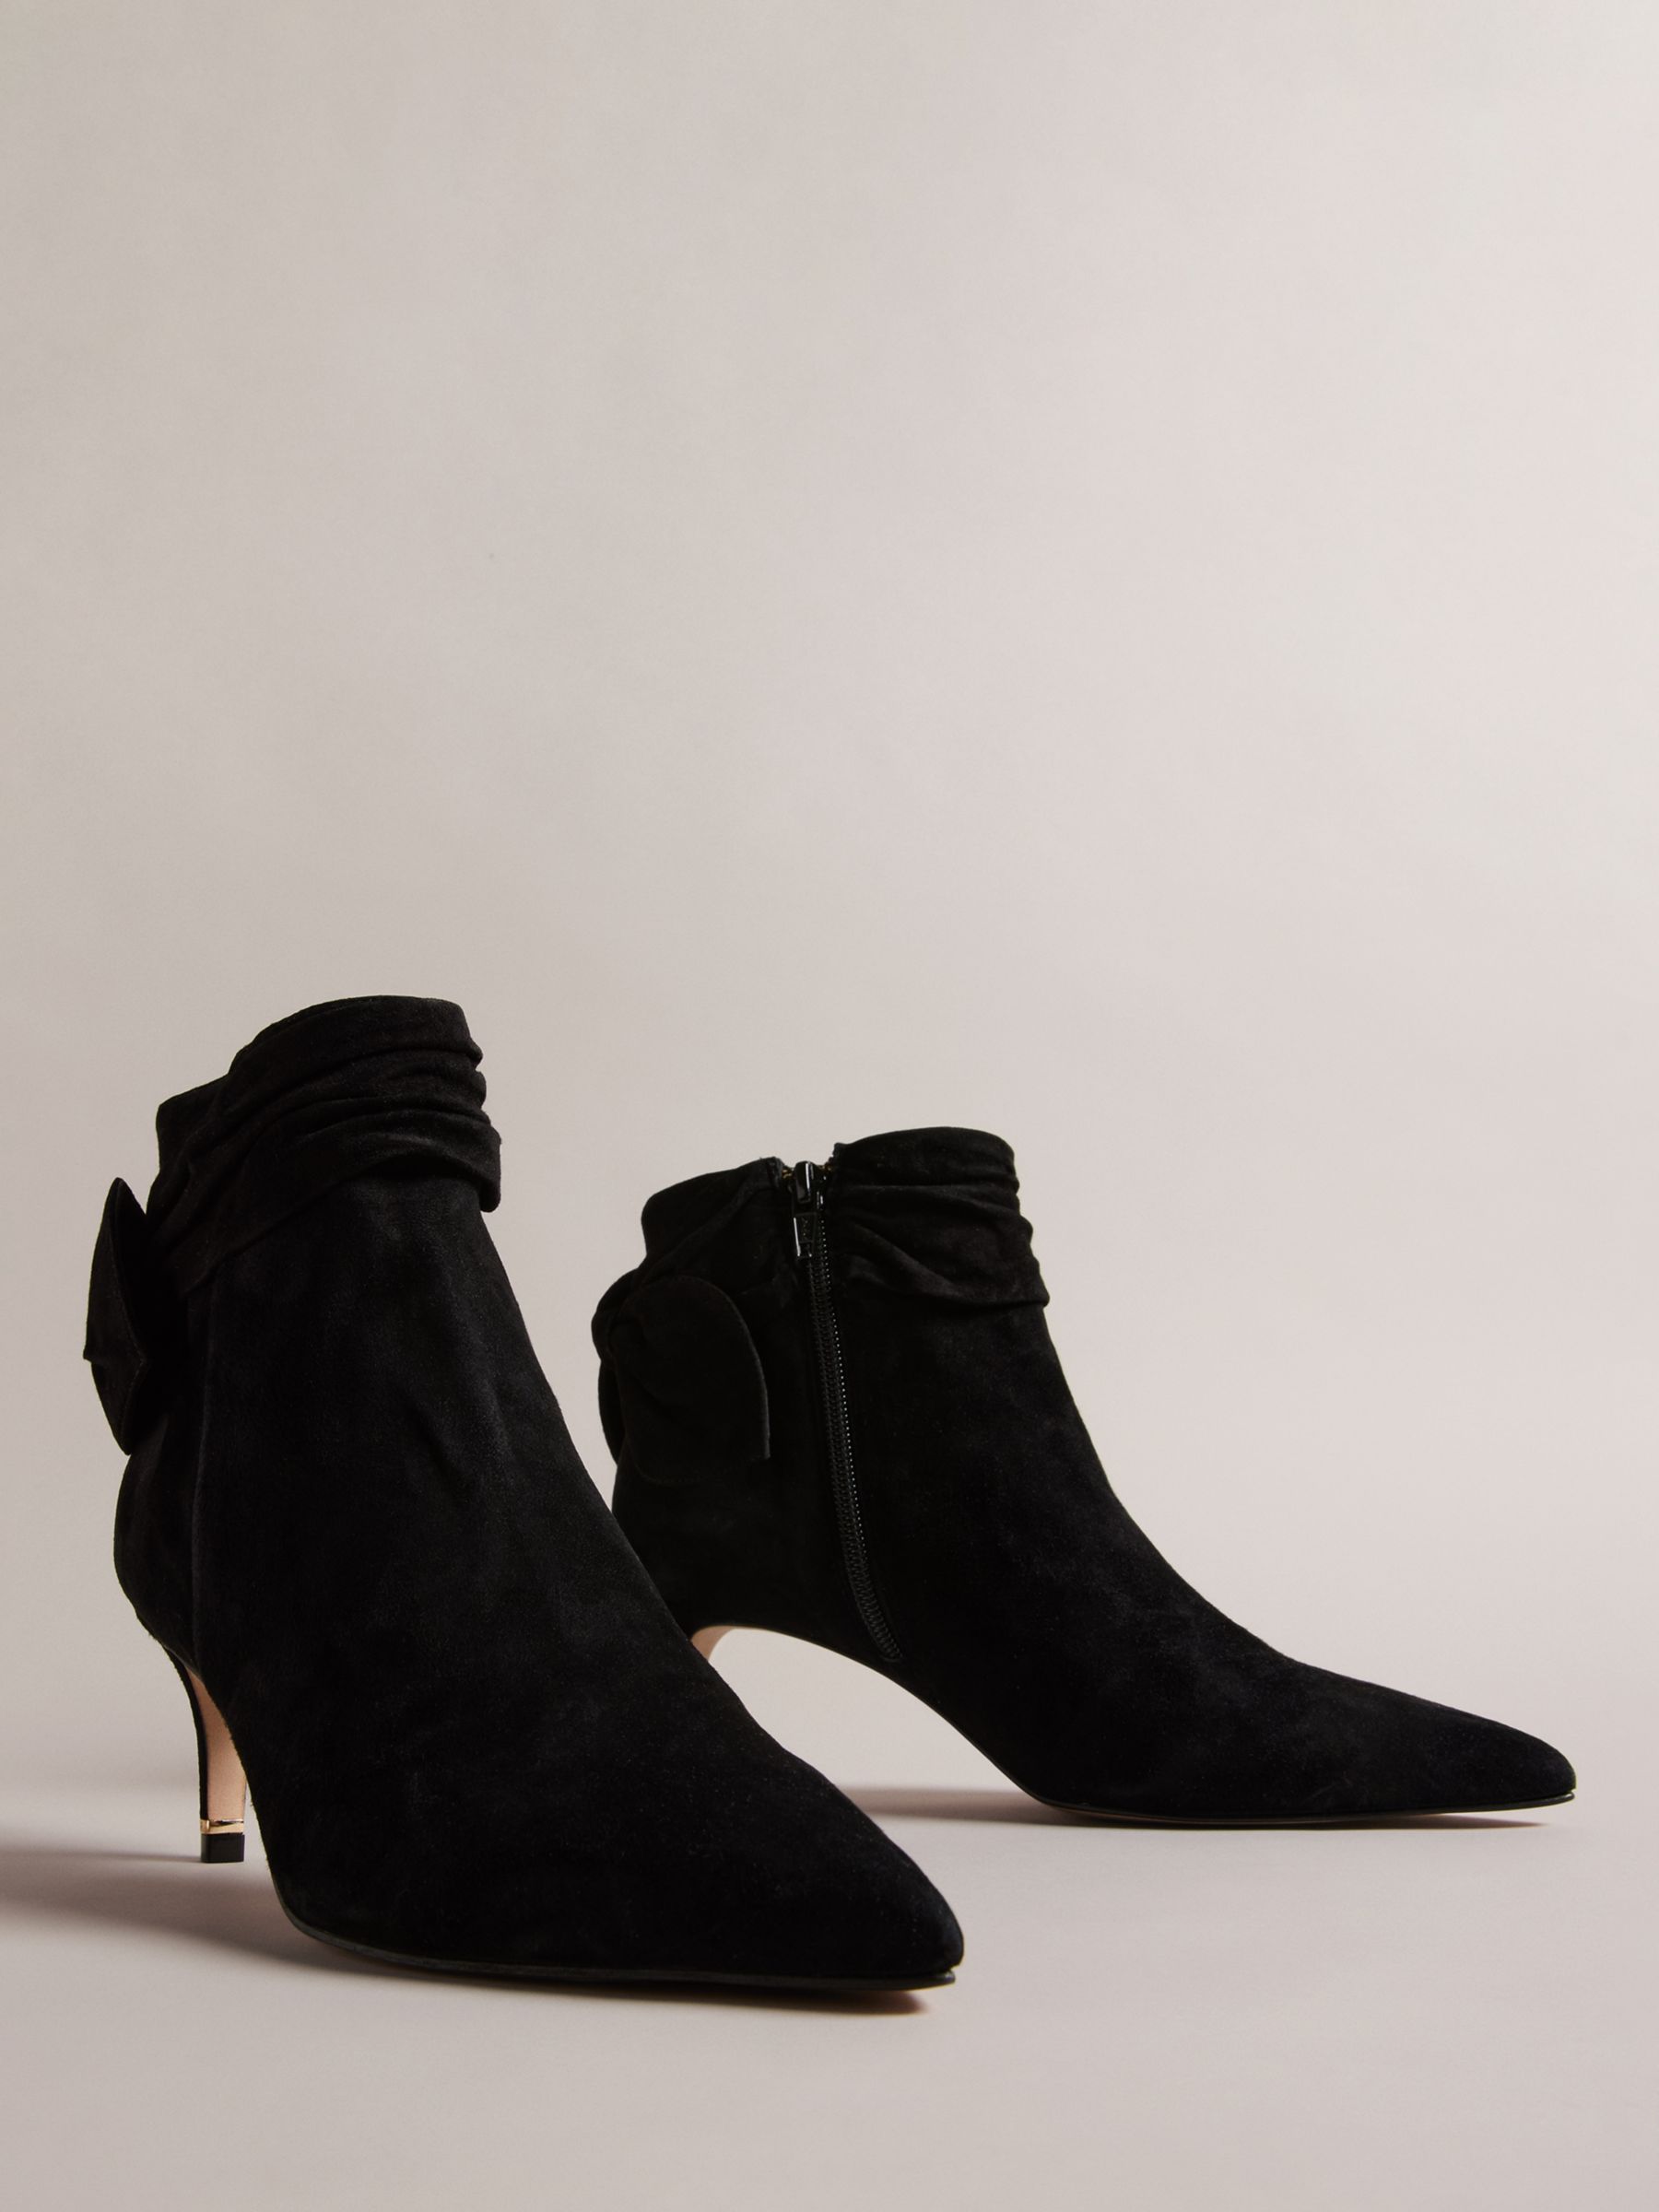 Ted Baker Yona Leather Ankle Boots, Black at John Lewis & Partners